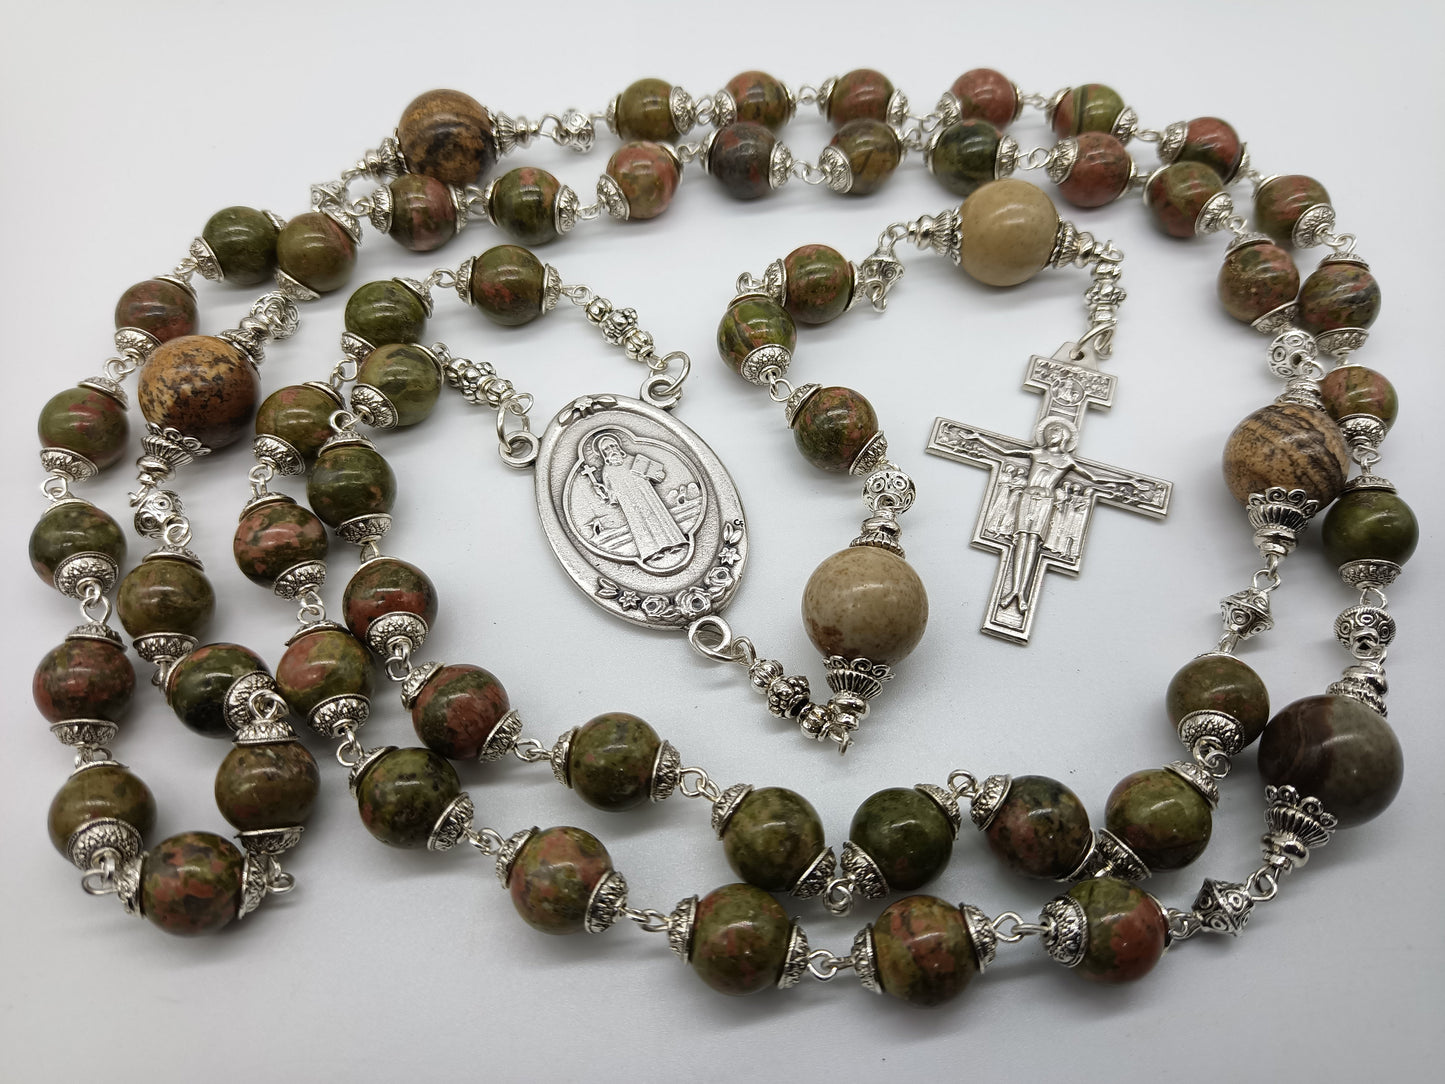 Large Handmade St. Benedicts Rosary beads, San Damiano Cross Rosary, St. Francis of Assisi Rosary beads, Unique Heirloom Rosaries.